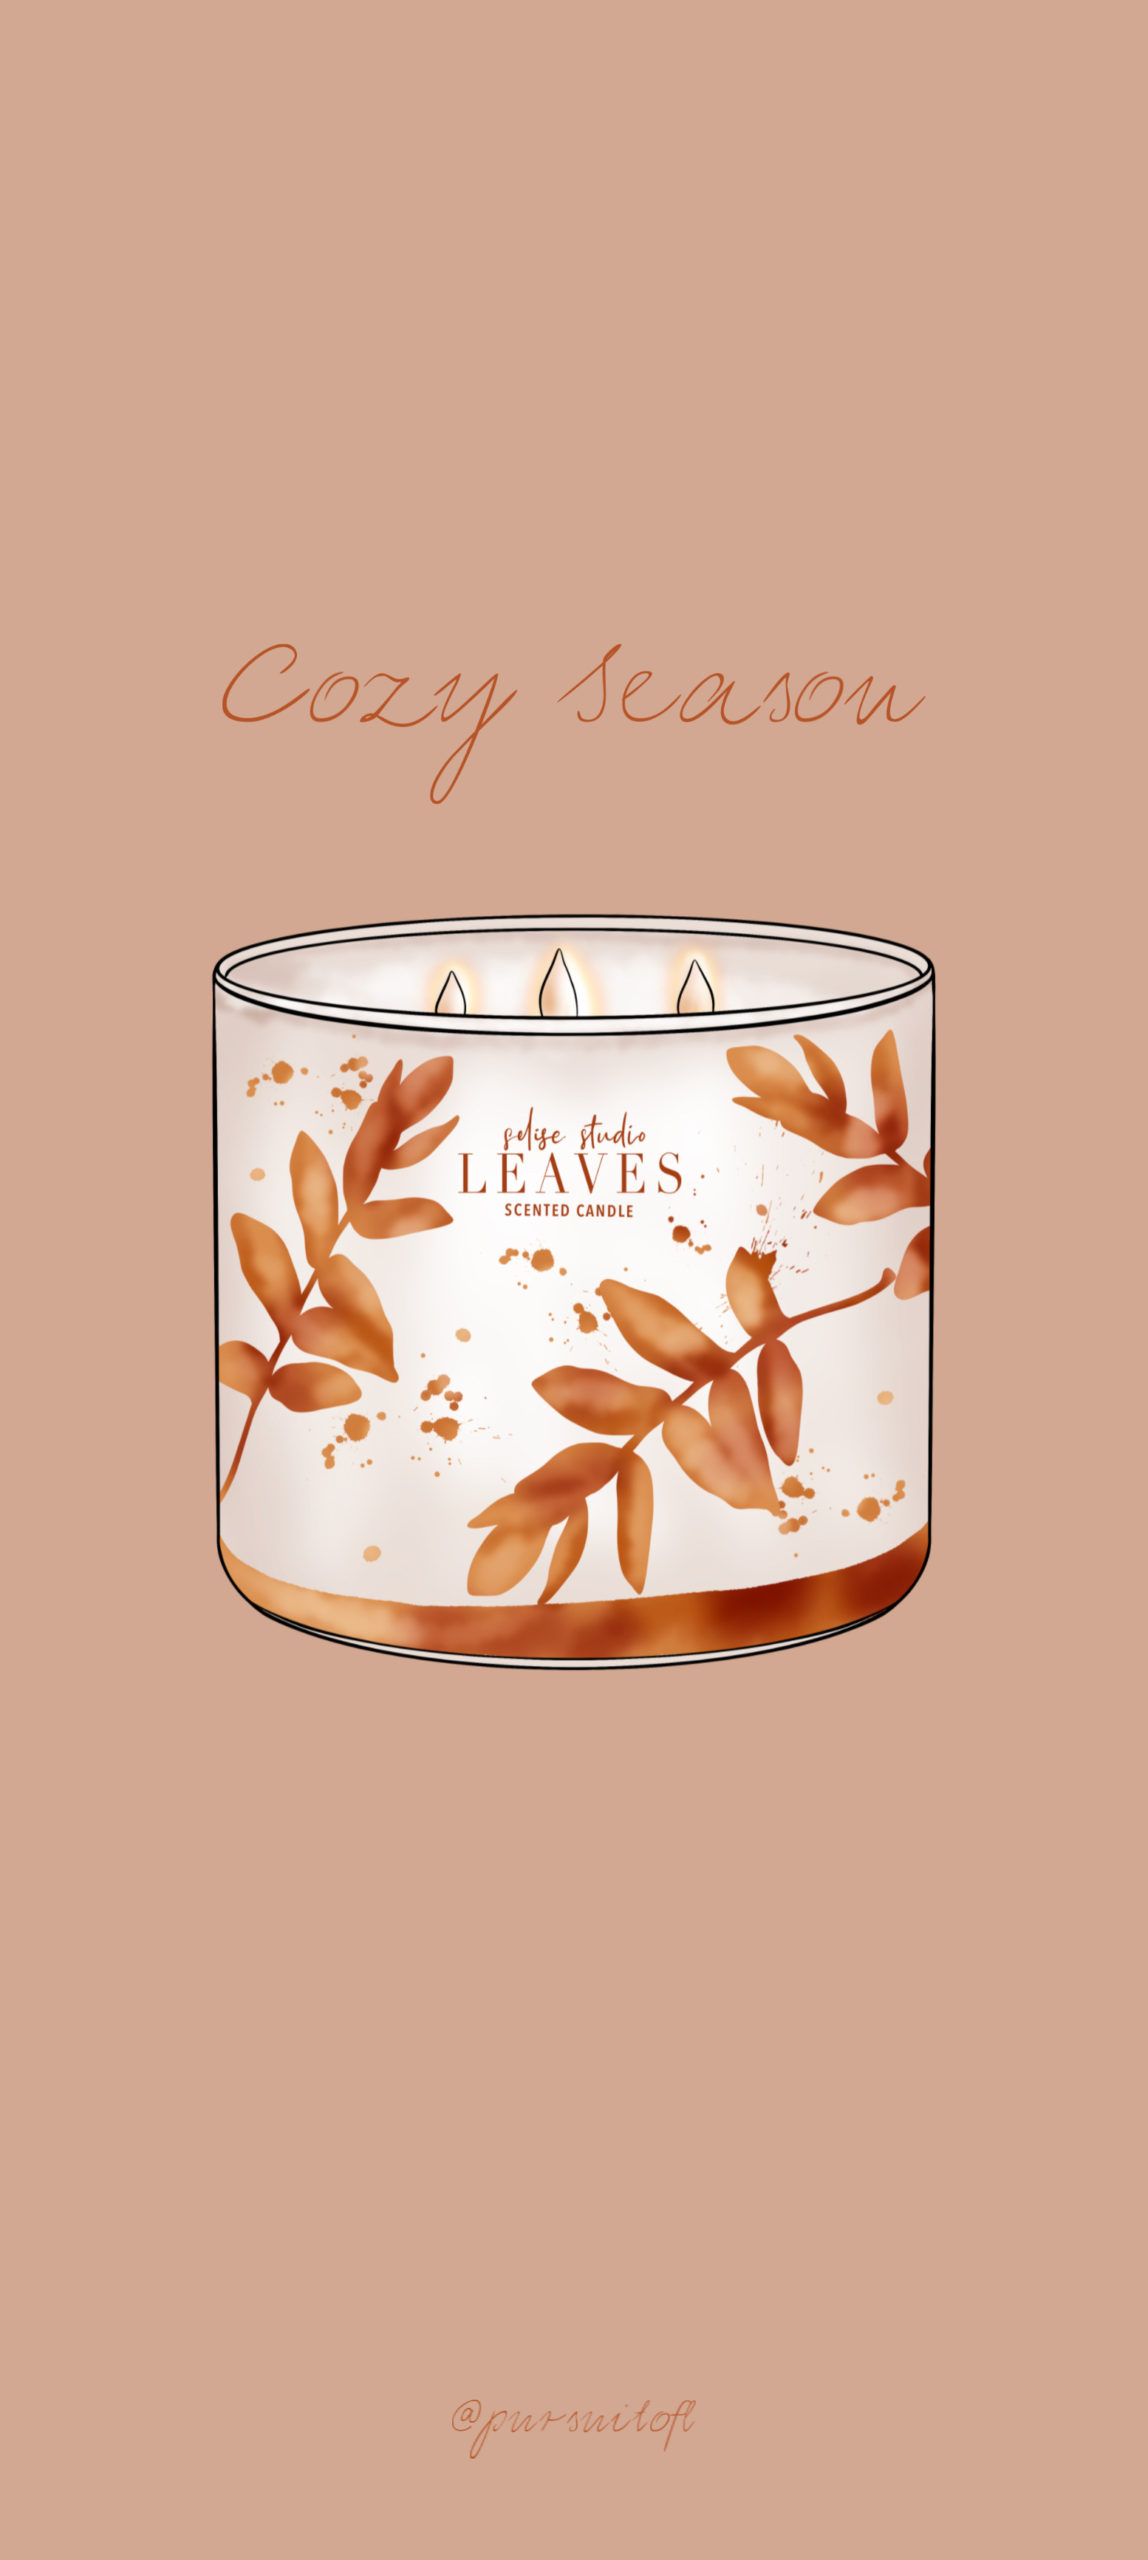 Tan Phone Wallpaper with leaves scented candle and cozy season text.